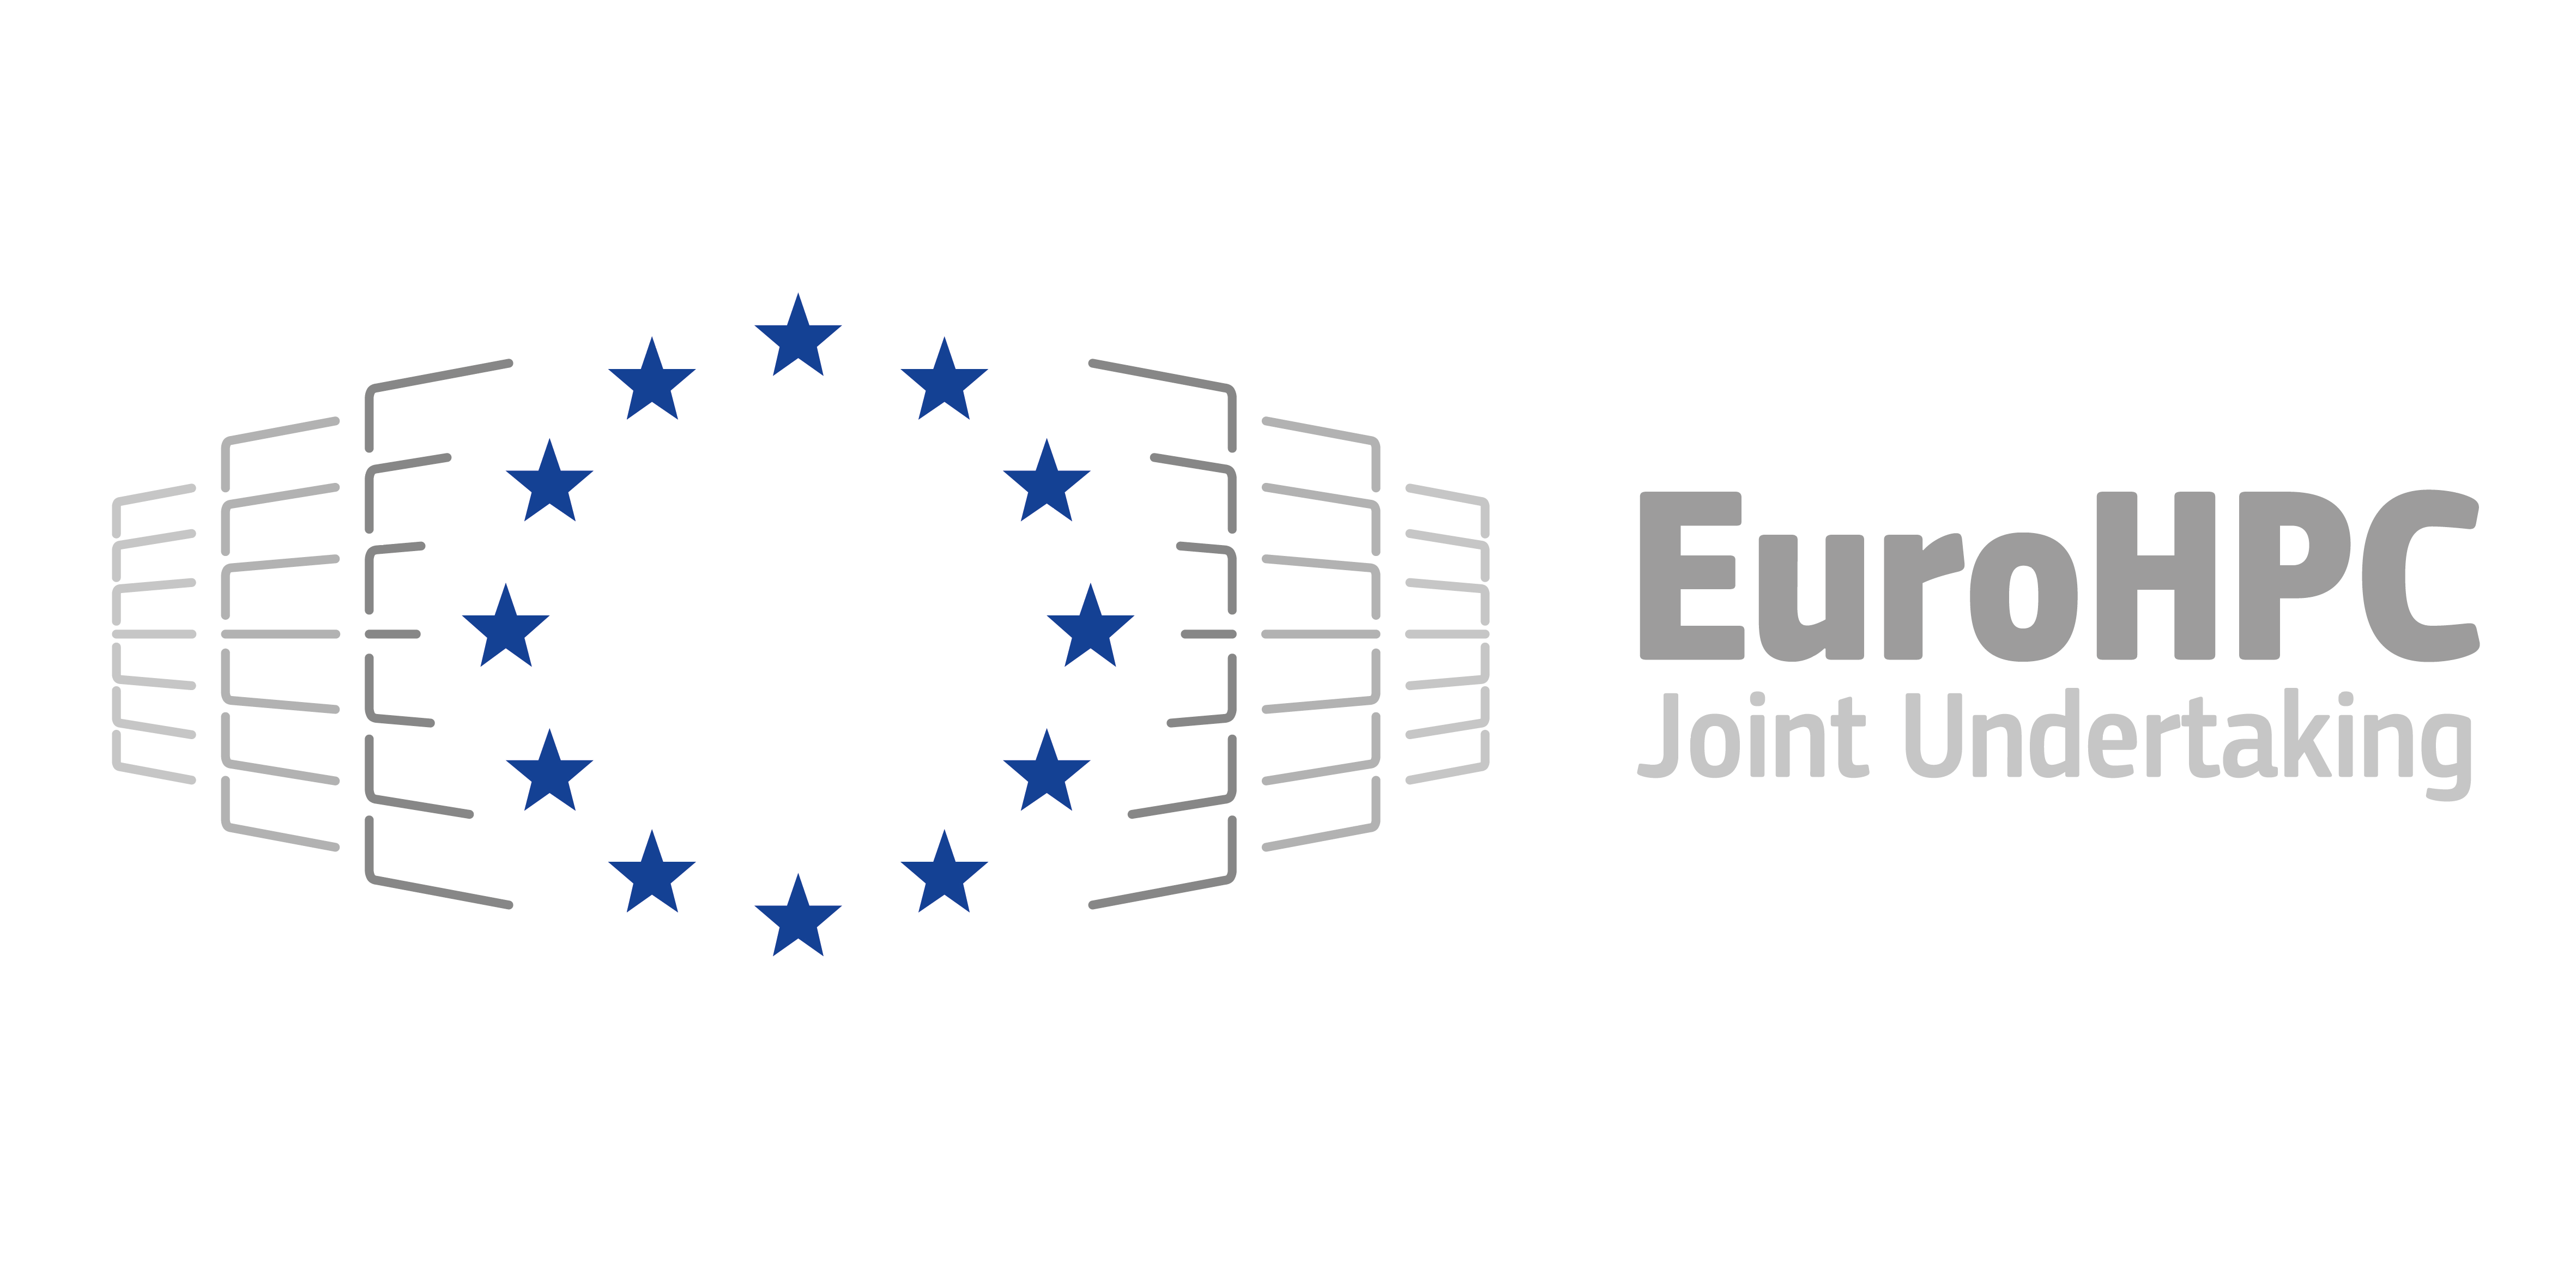 EuroHPC Joint Undertaking logo: a circle of blue stars surrounded on left and right by stylized line drawings of server wracks